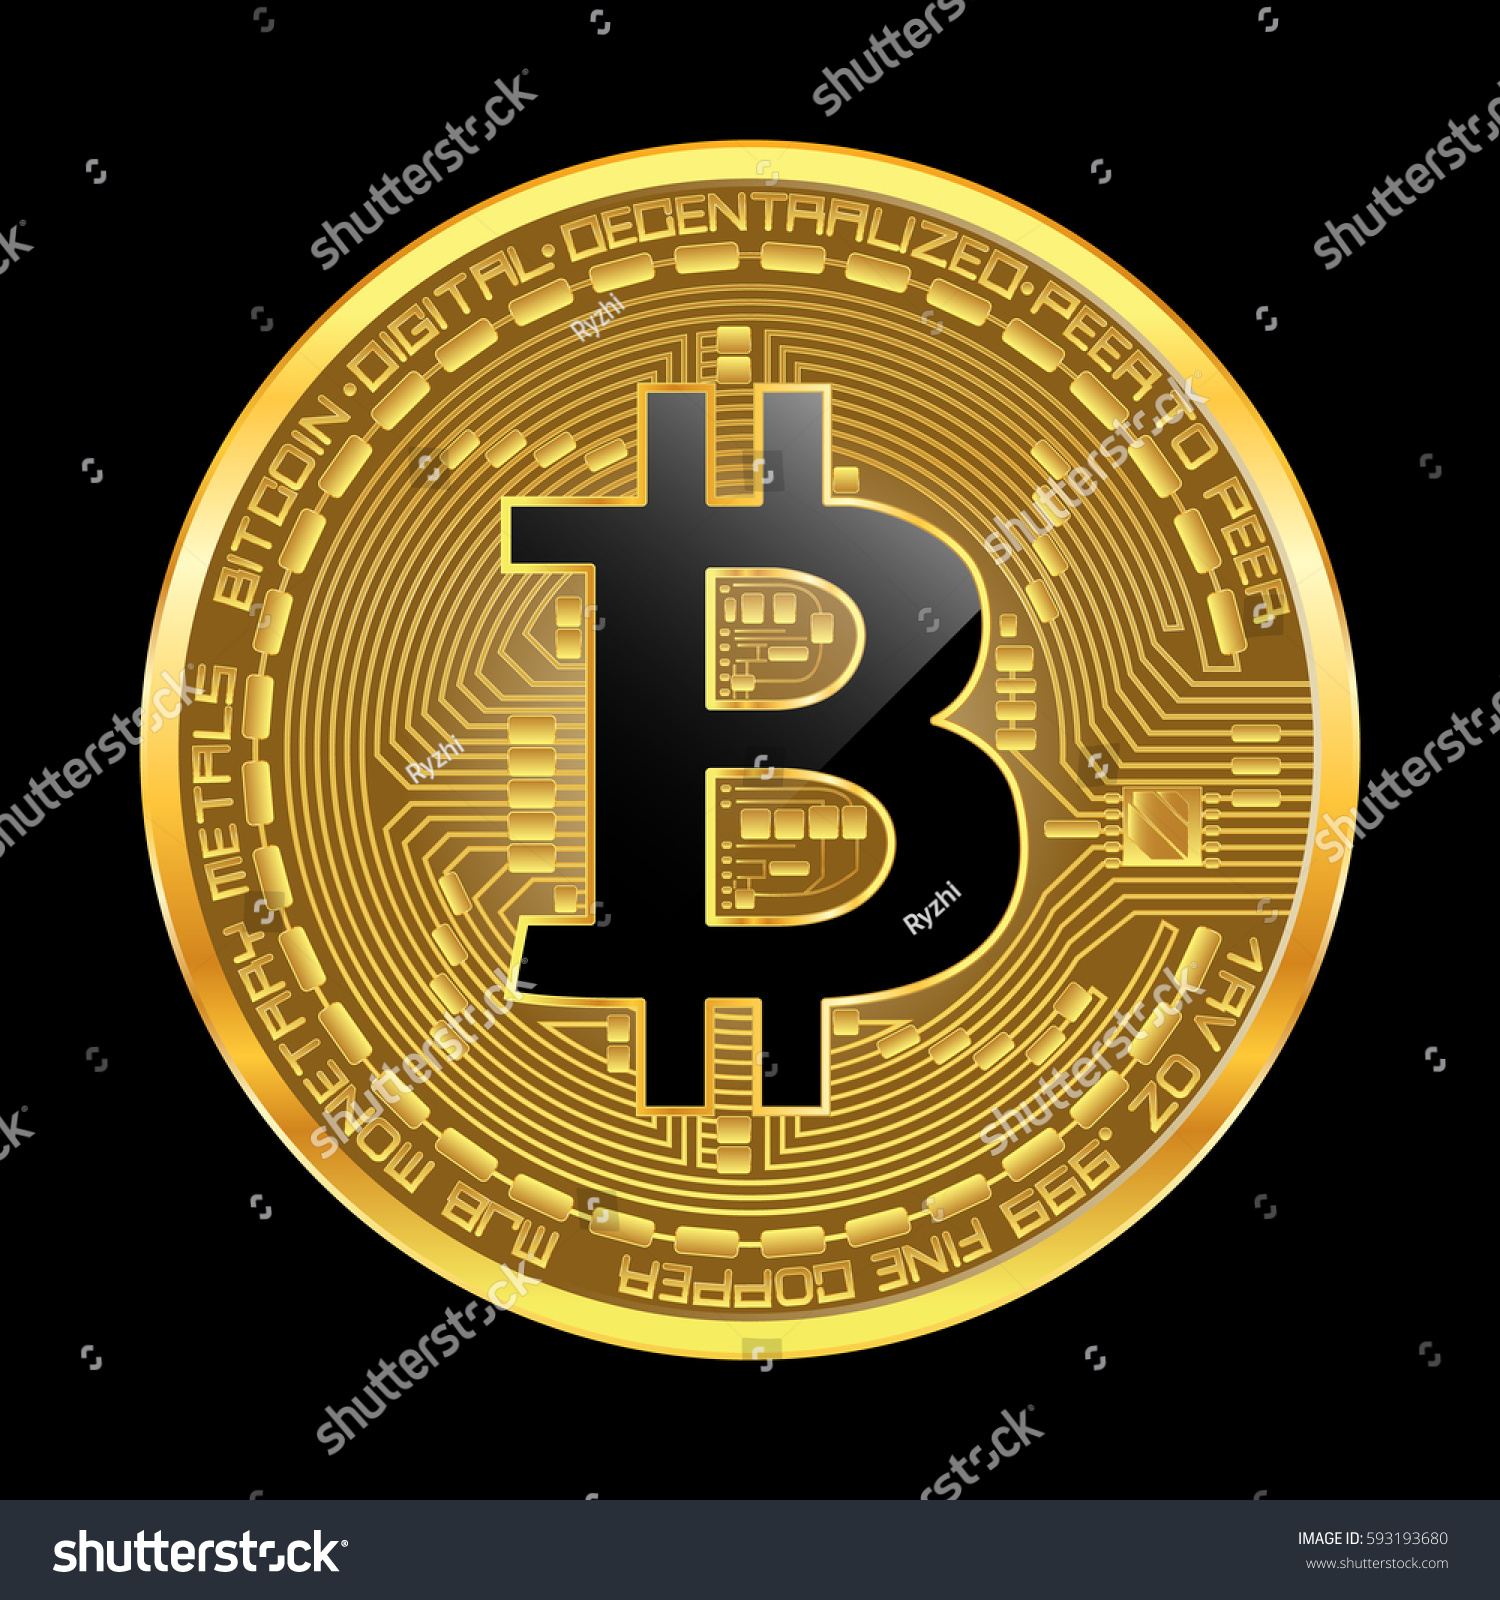 Crypto Currency Golden Coin Black Lackered Stock Vector 593193680 - Shutterstock